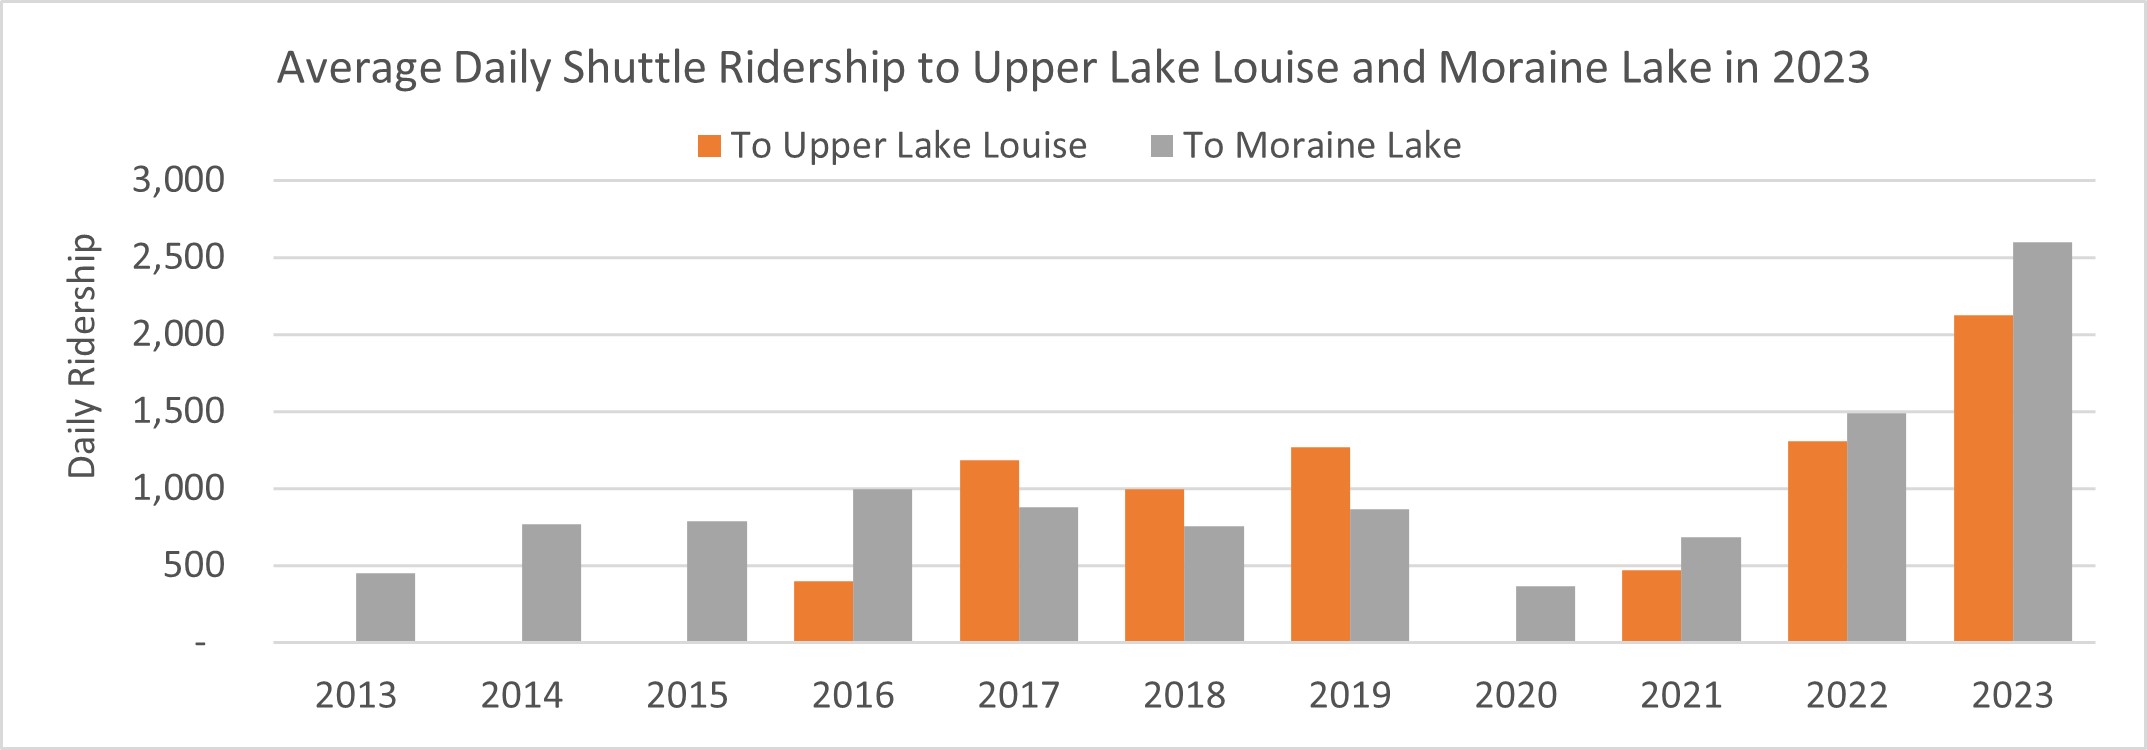 Graphic of Average Daily Shuttle Ridership to Upper Lake Louise and Moraine Lake in 2023. More details provided in the text version below. 